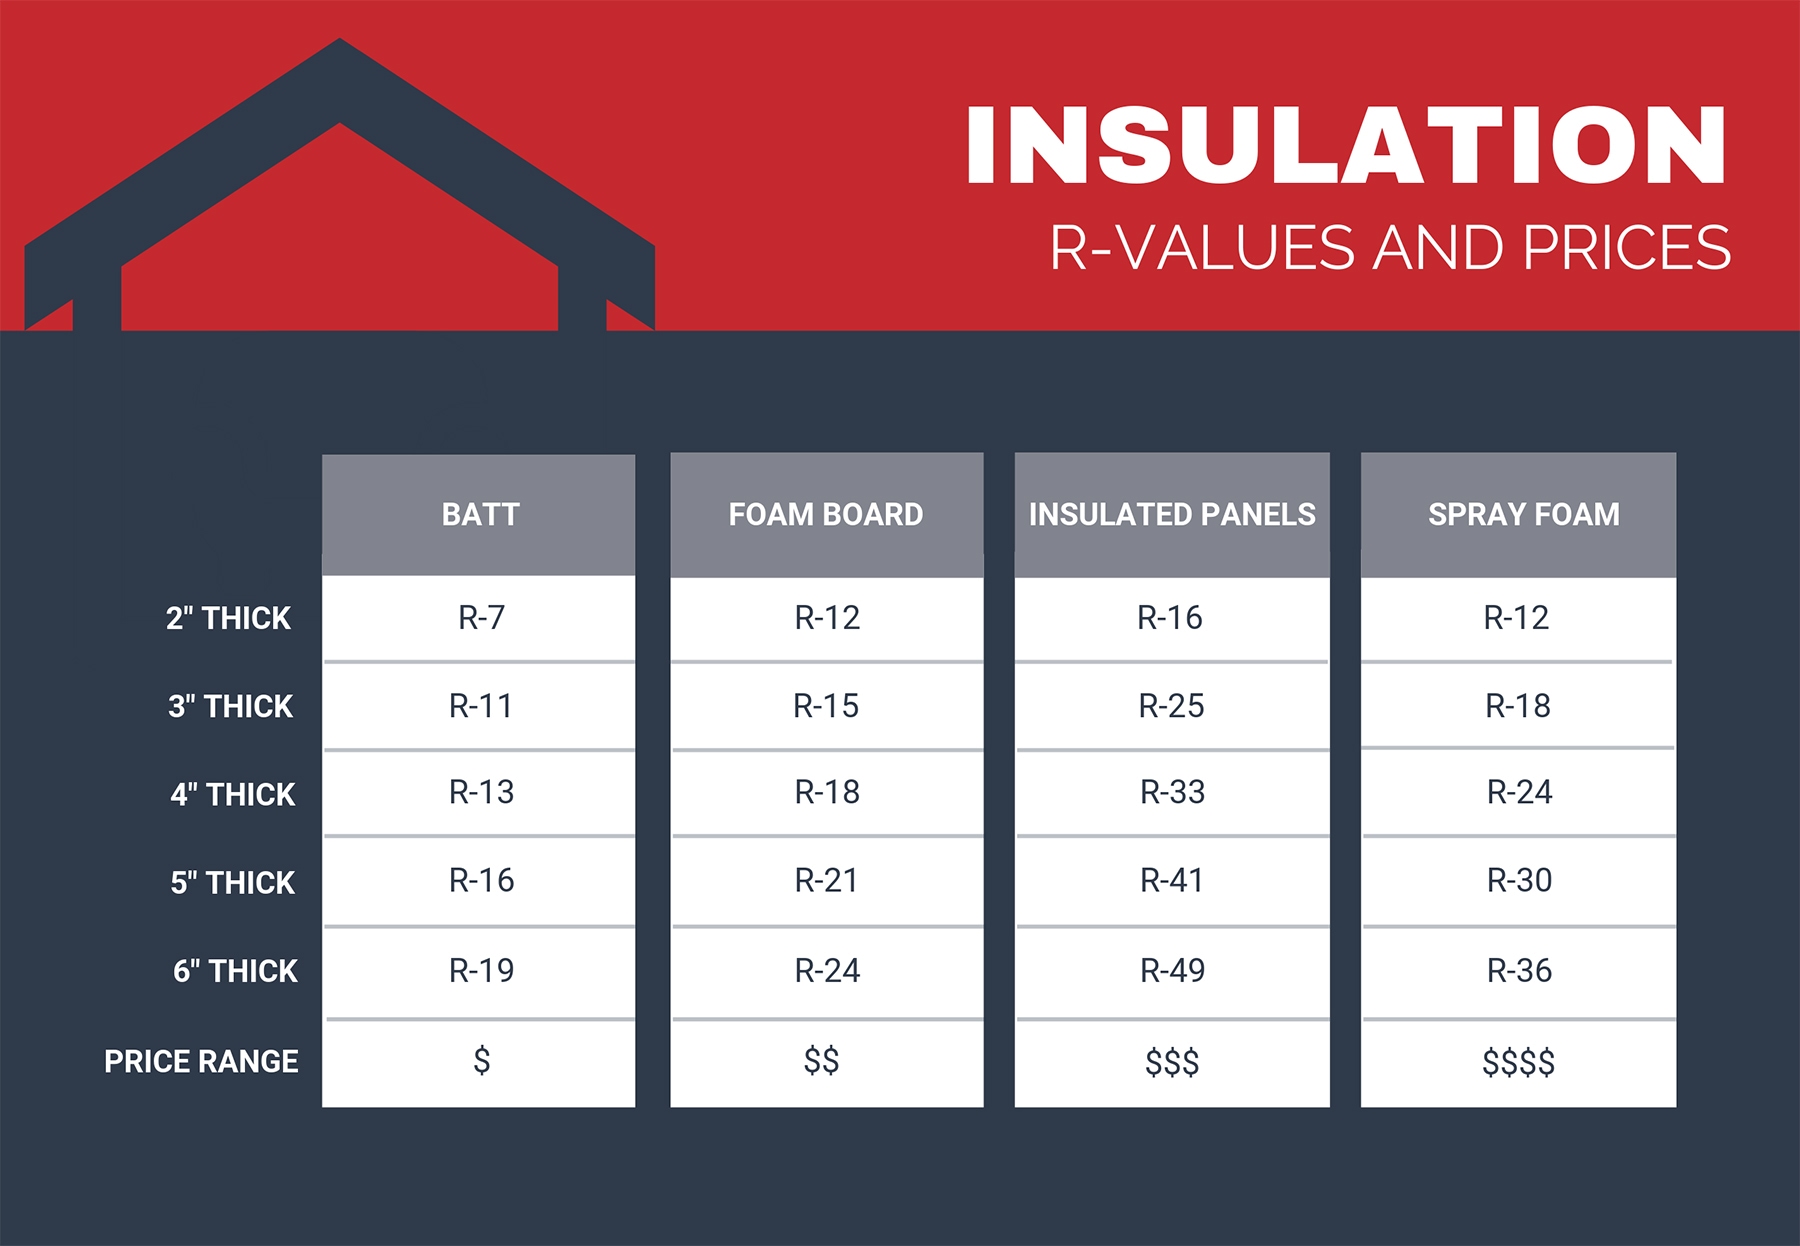 Insulation R-Values and Prices